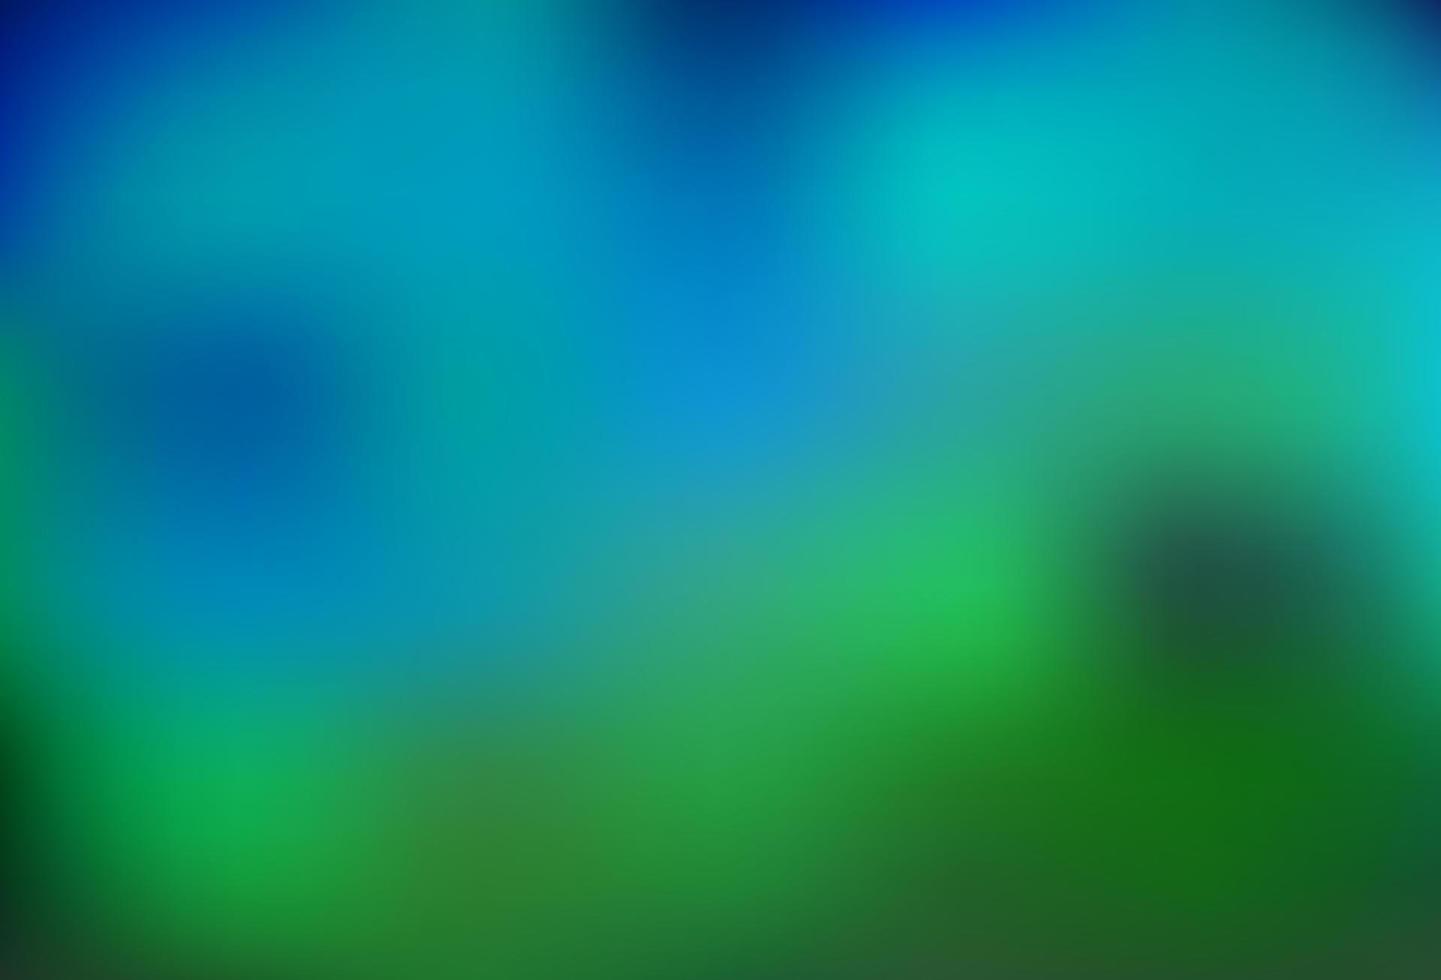 Dark Blue, Green vector abstract bright background.